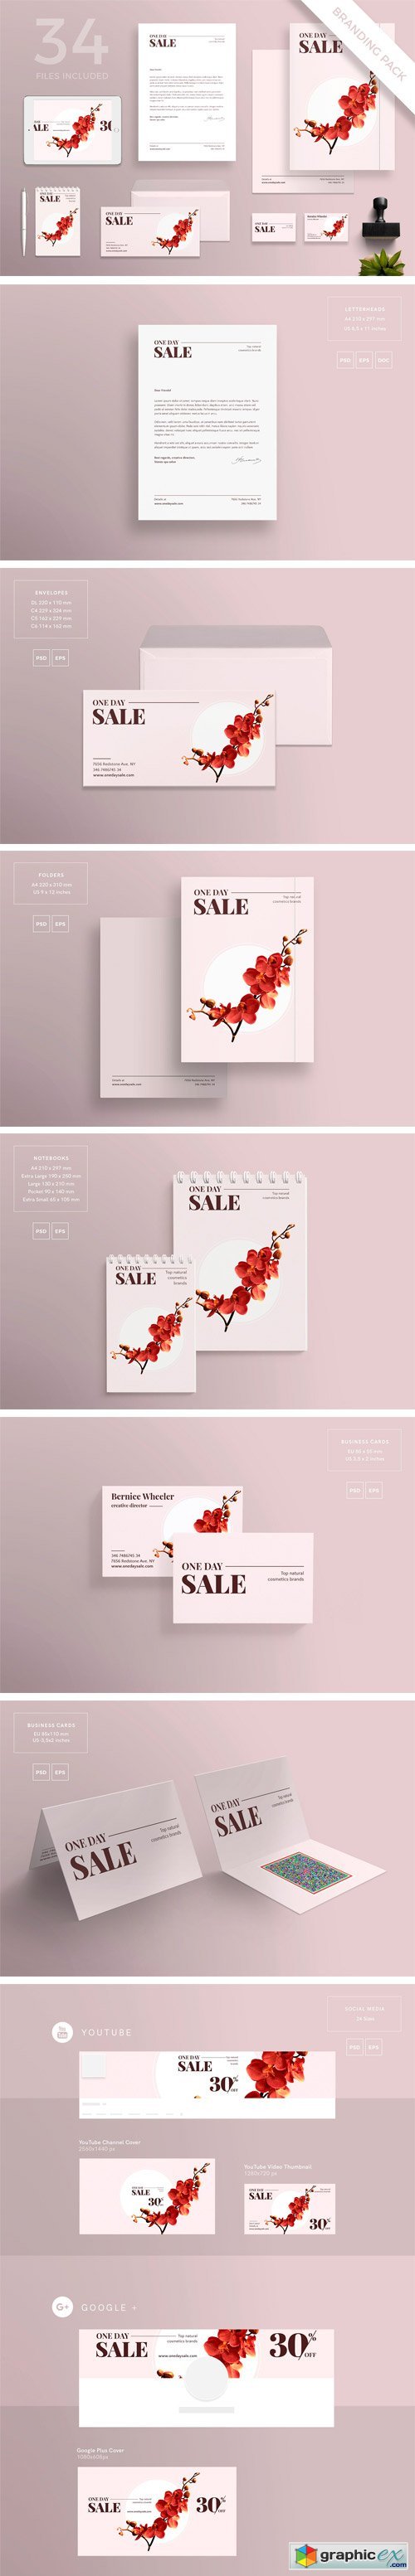 Branding Pack | One Day Sale